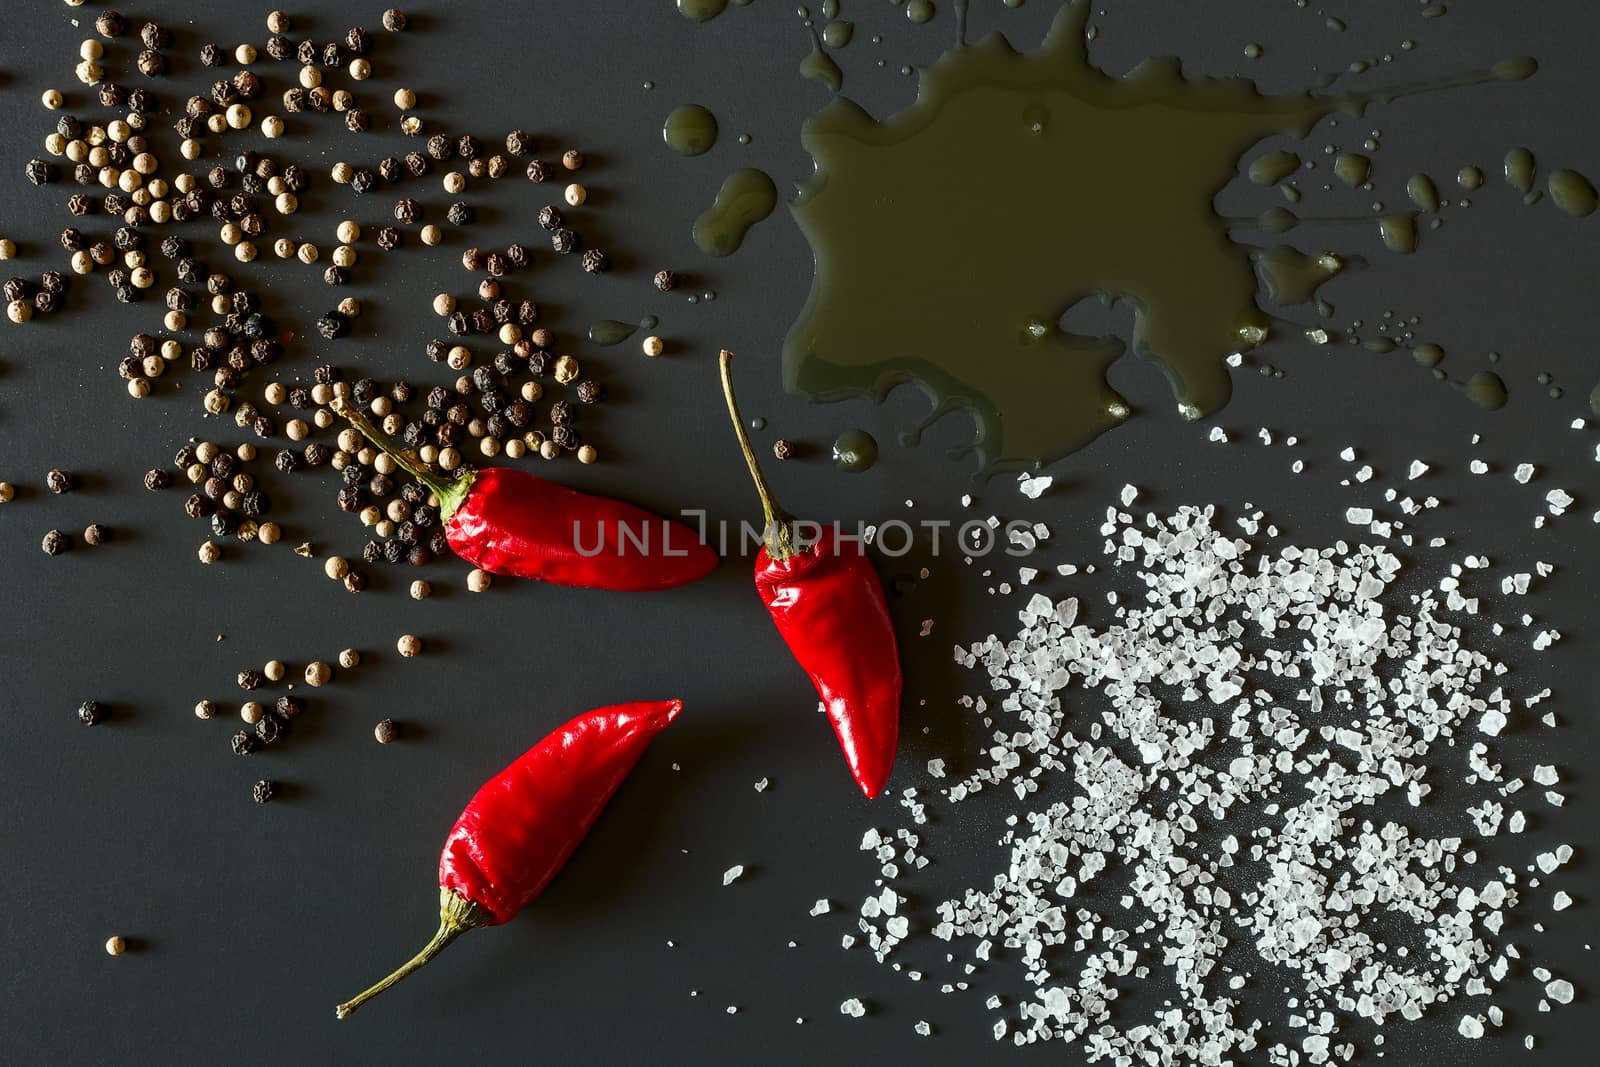 Chili peppers, oil, salt and pepper over a dark background seen from above